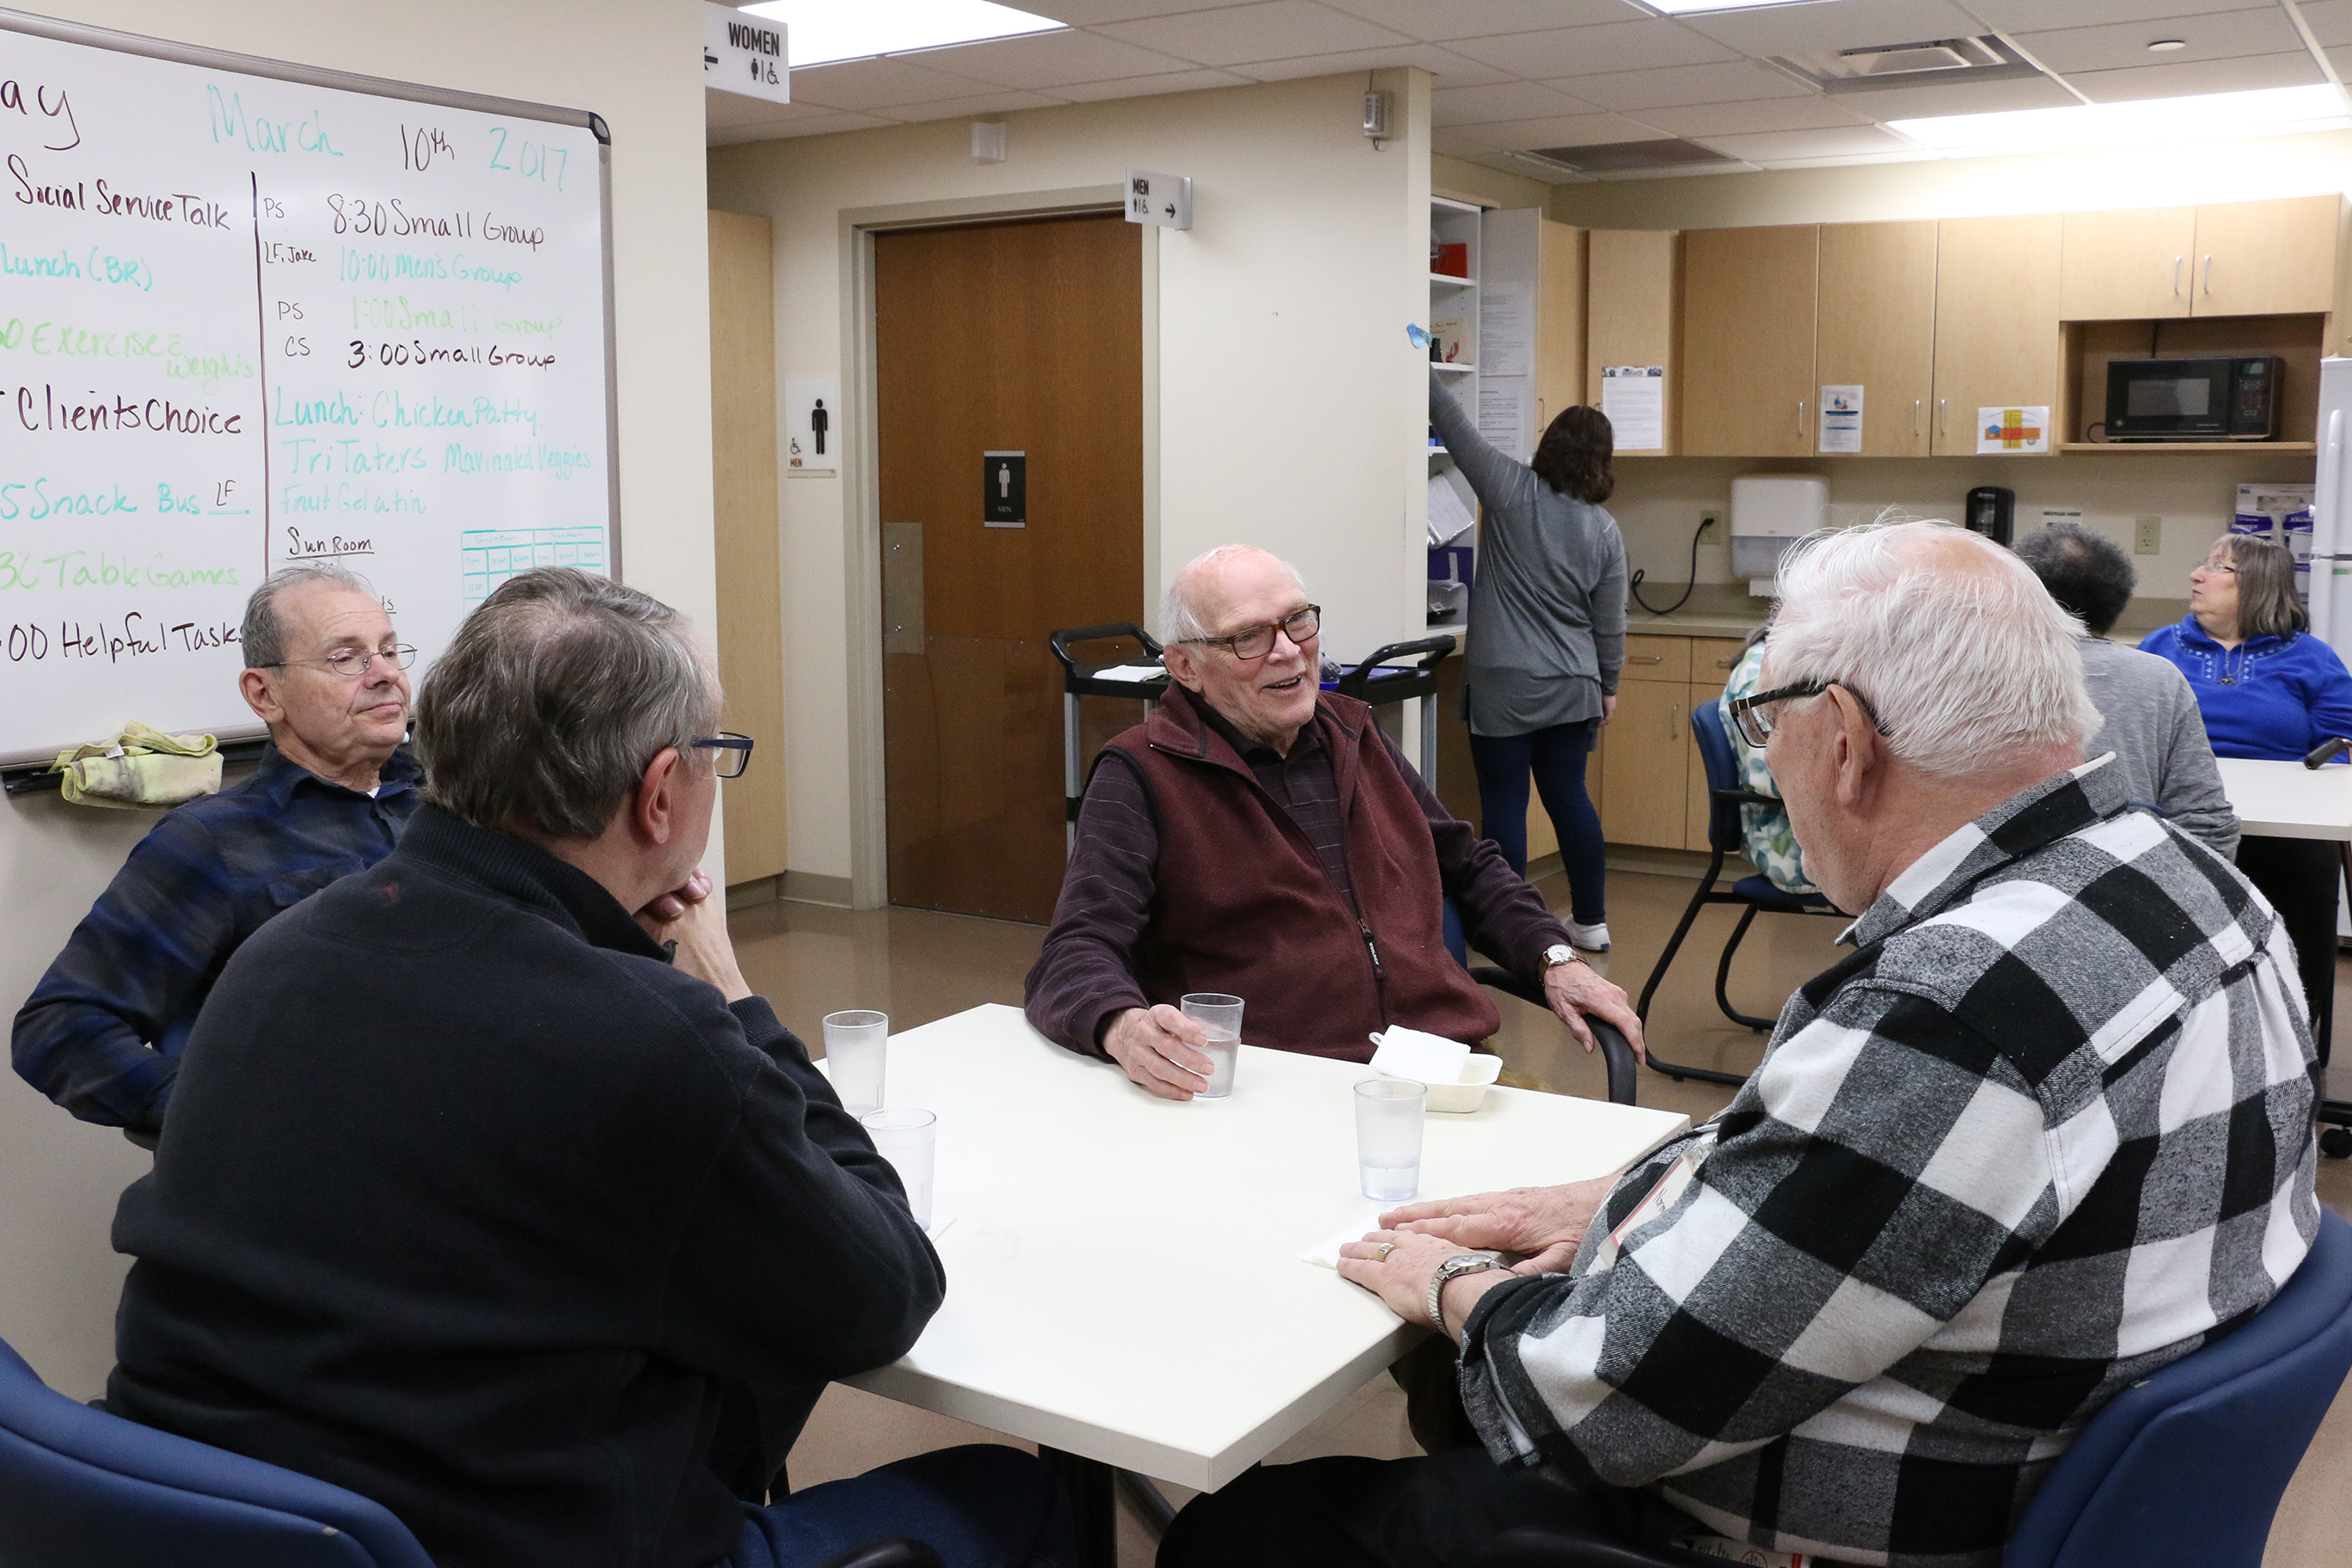 group of older adults talking, adult day health program, active programming for elders, healthy aging & caregiving, wilder foundation community center for aging